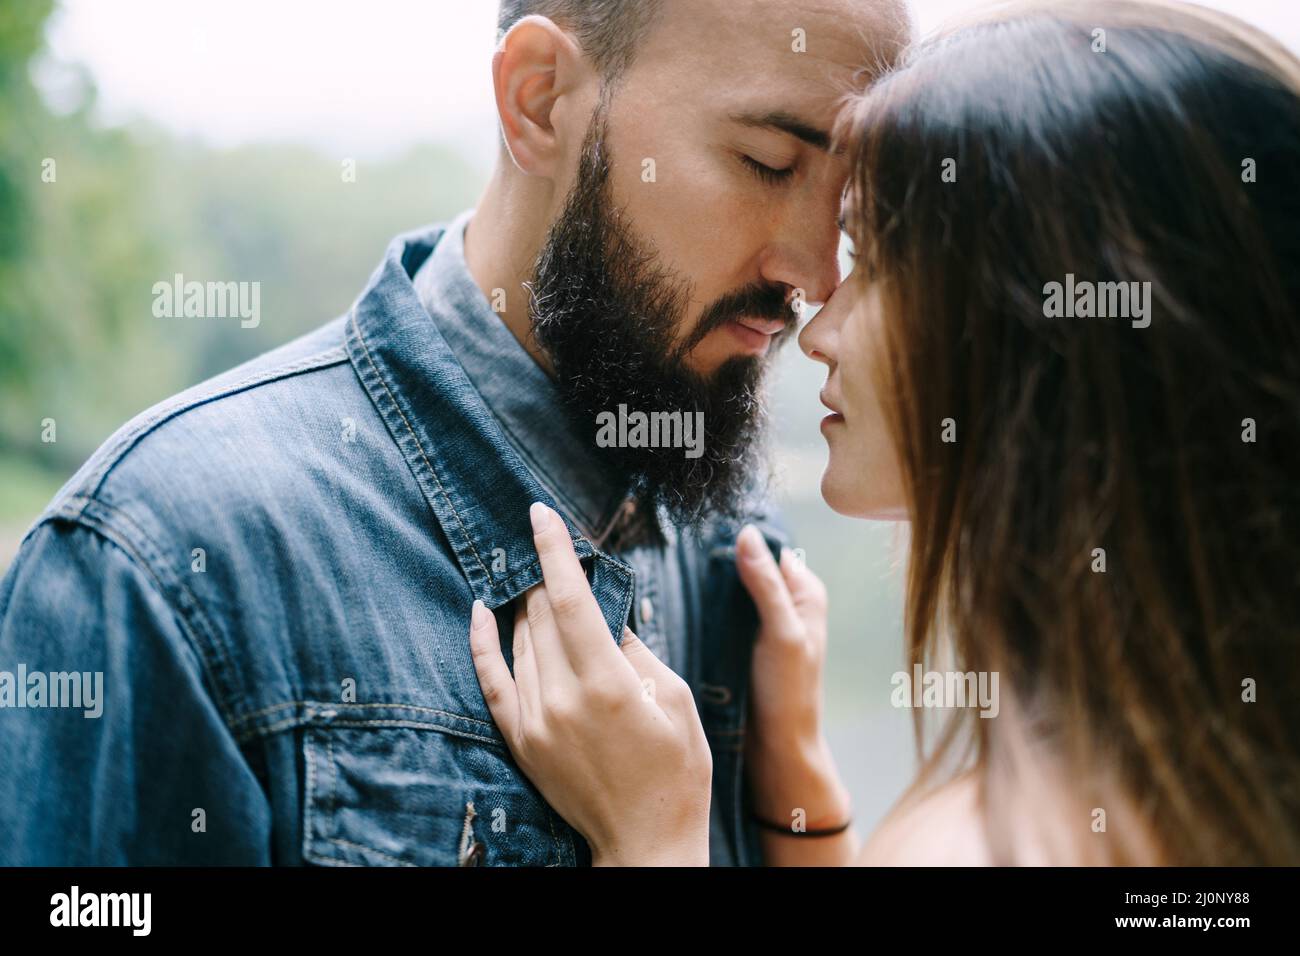 Man leaned his forehead against the woman. Close-up Stock Photo